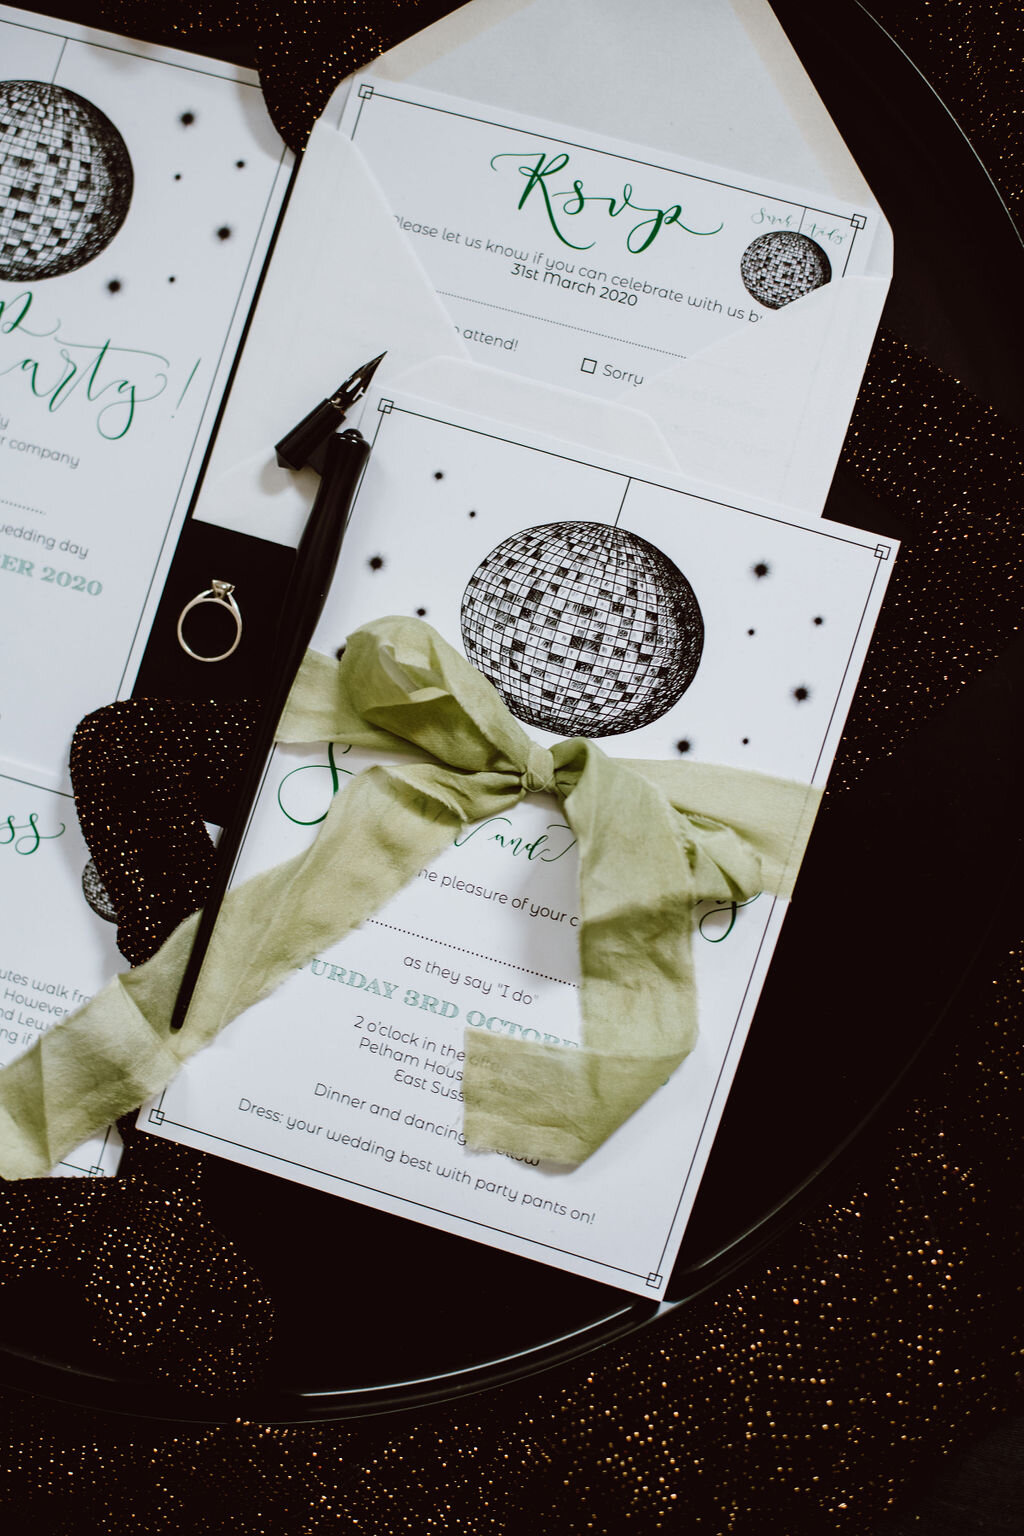 Disco ball invites - eco friendly invitations made from recycled paper - Pelham House wedding stationery suite.jpg